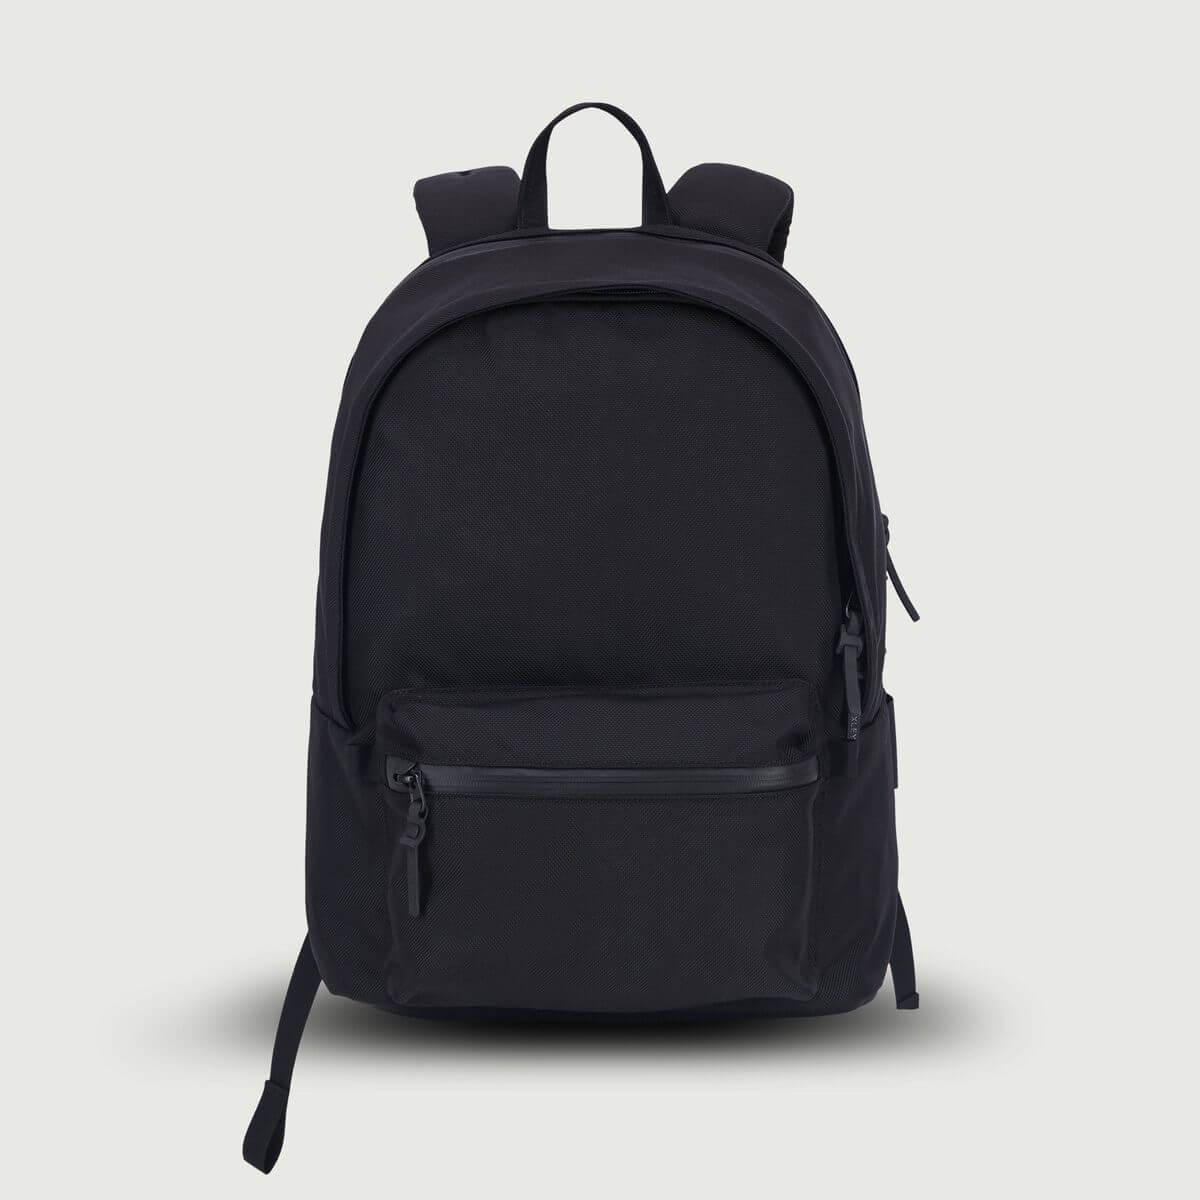 WEXLEY THE CLASSIC DAYPACK